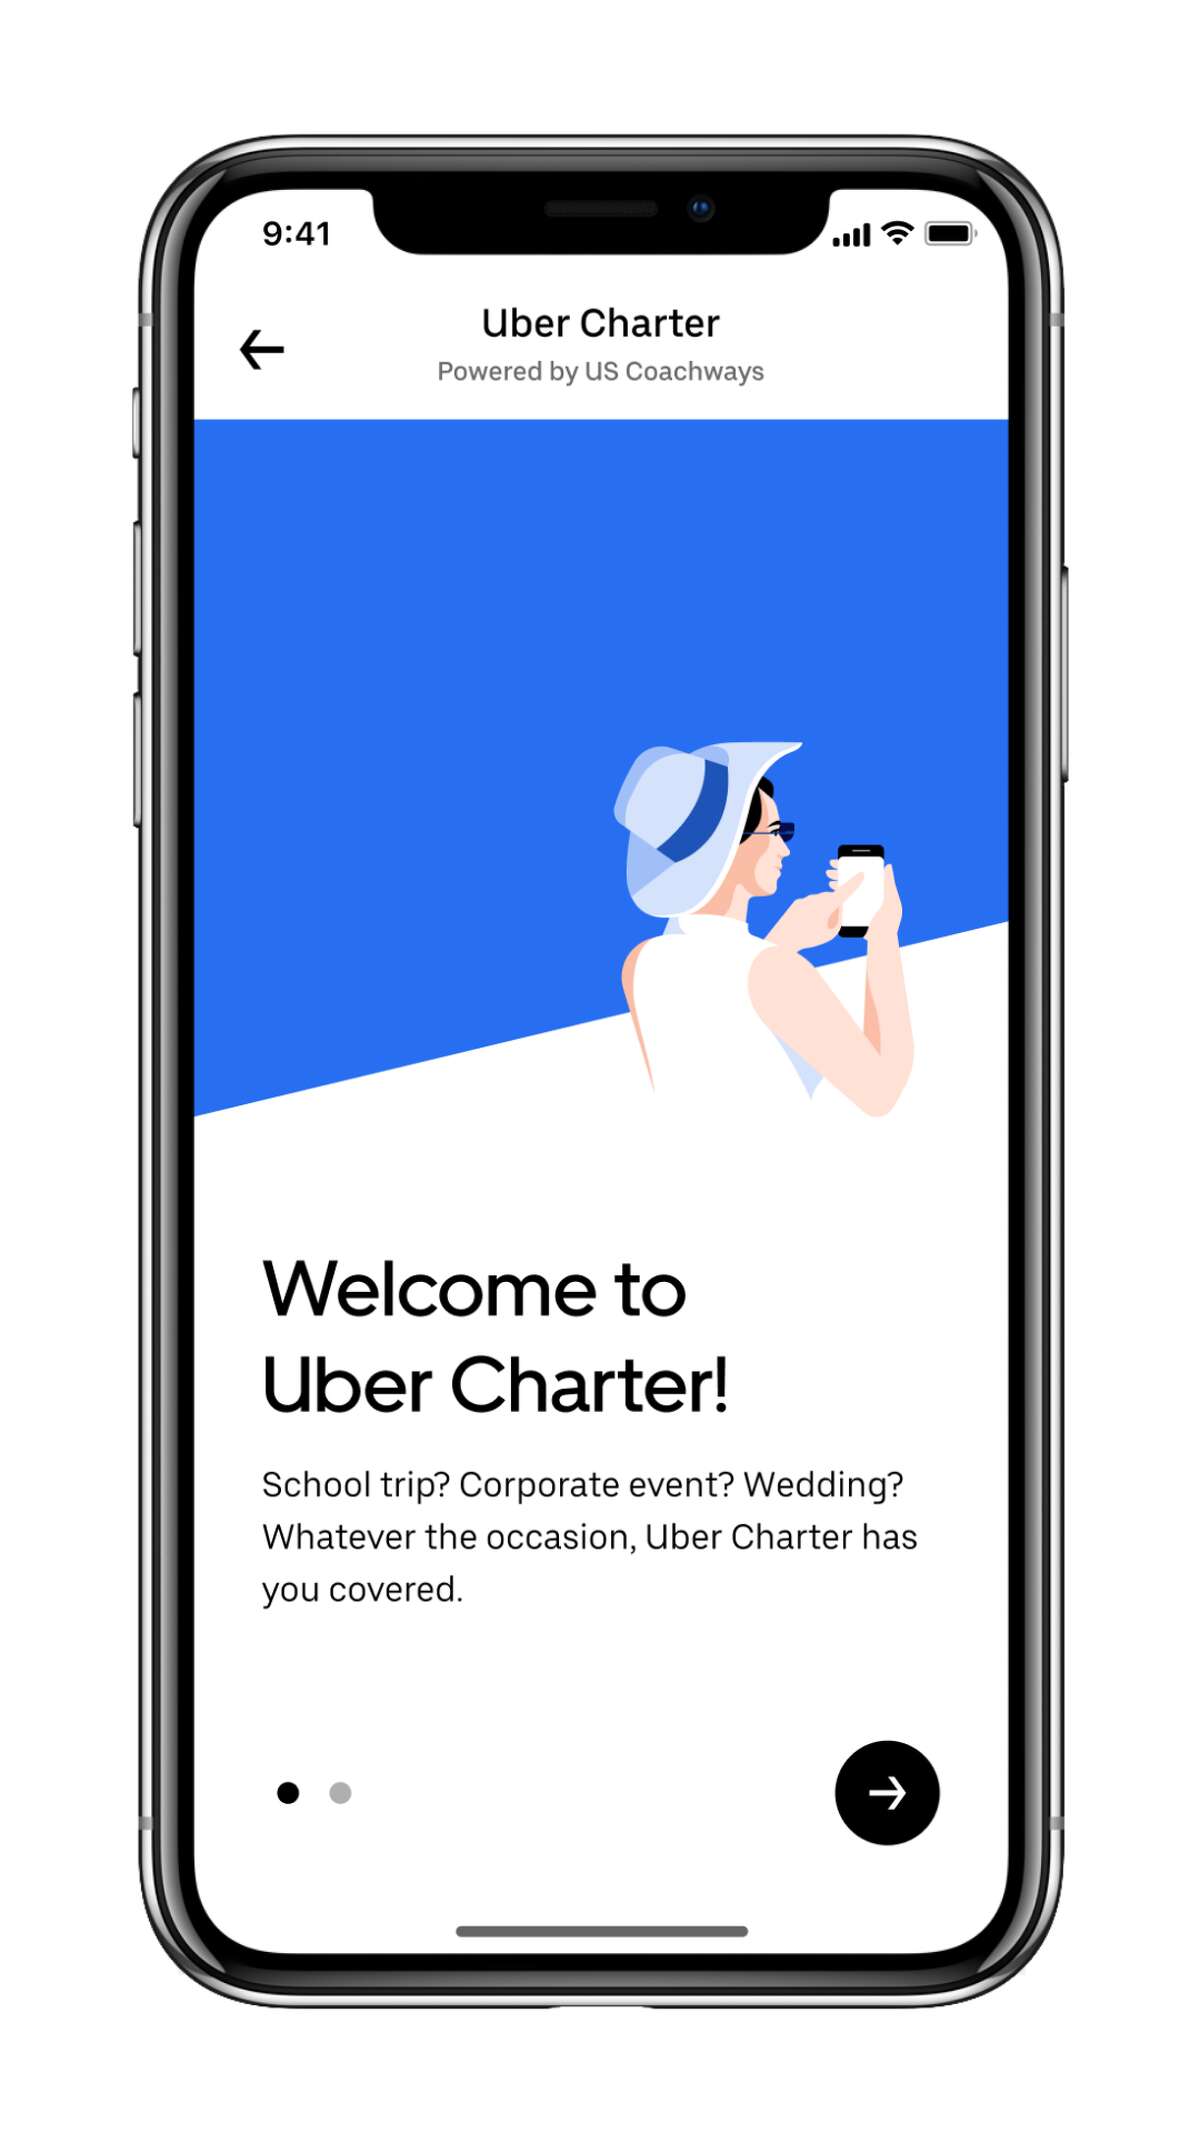 Screenshots show the booking process for an Uber Charter debuting Thursday, July 7, 2022 only in Houston and Dallas Fort-Worth. Uber plans for a nationwide launch scheduled for this summer.